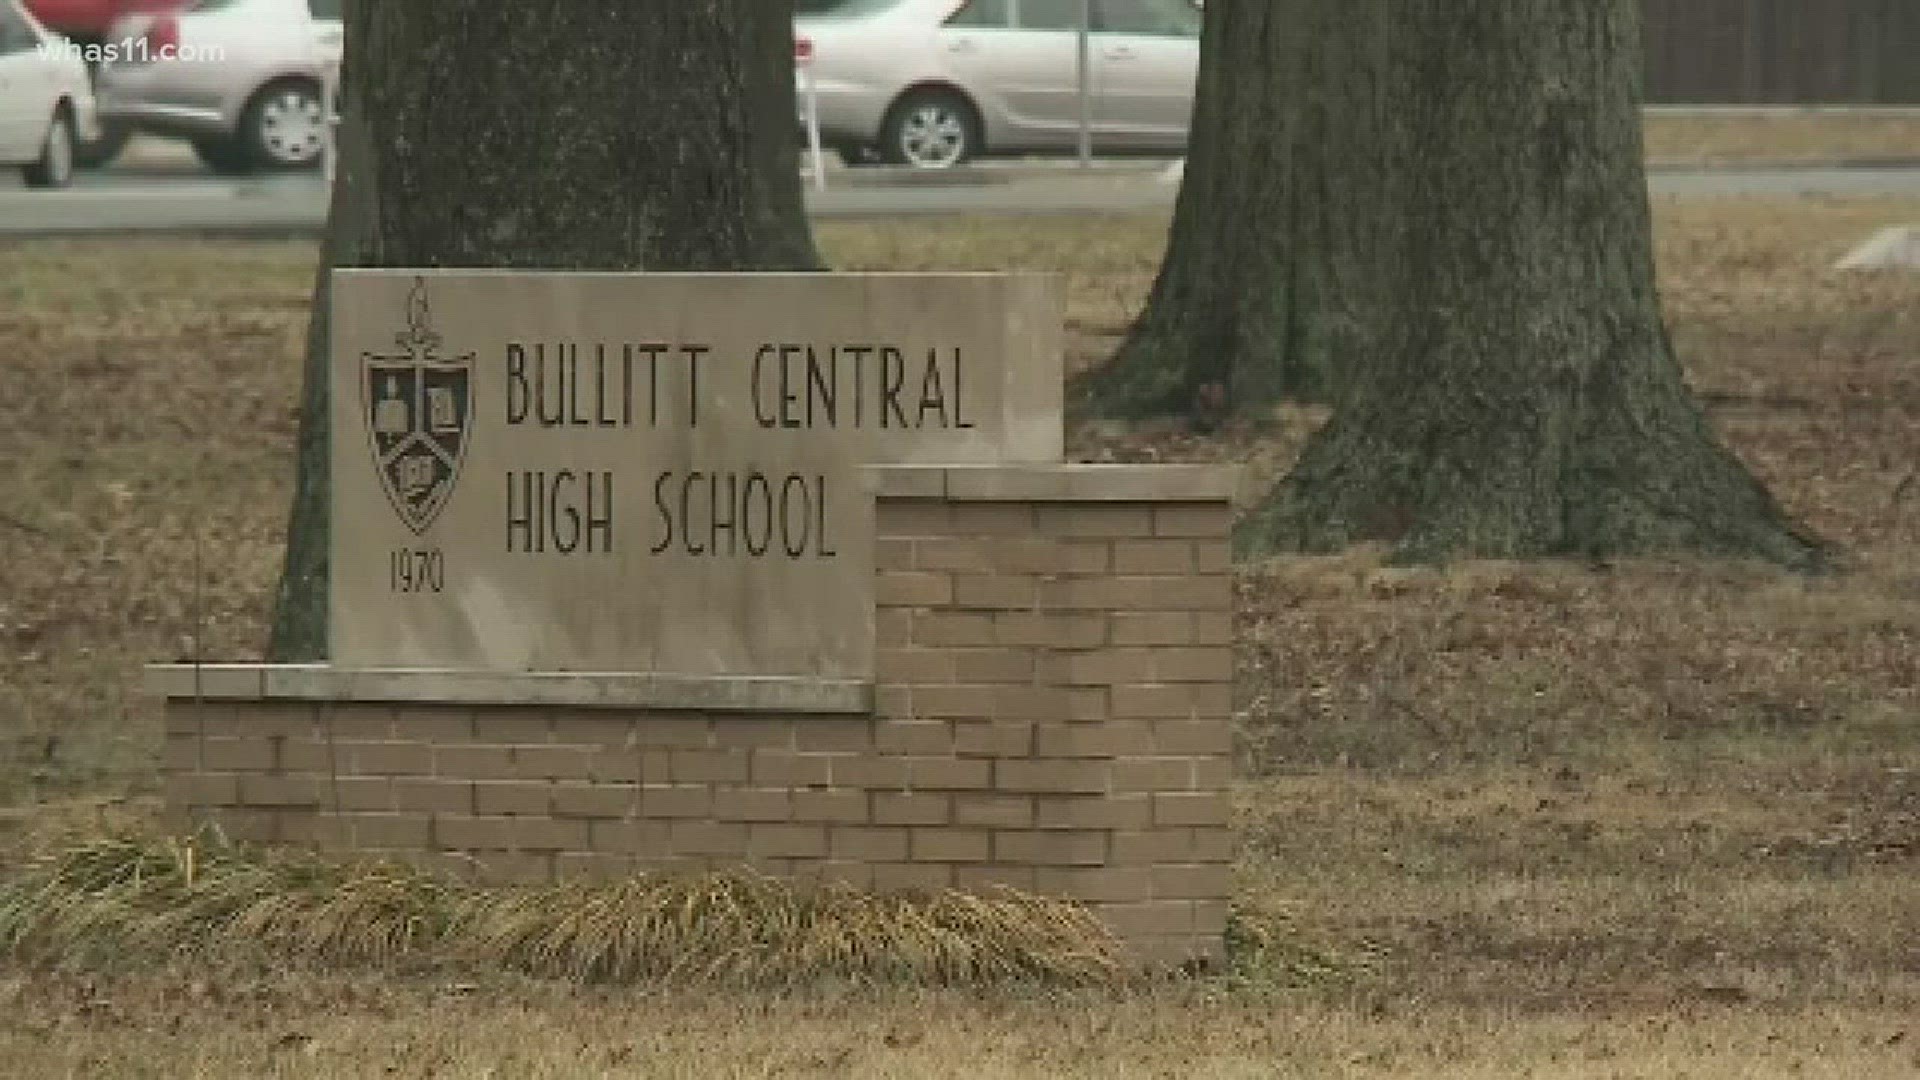 Student arrested for threatening note at HS